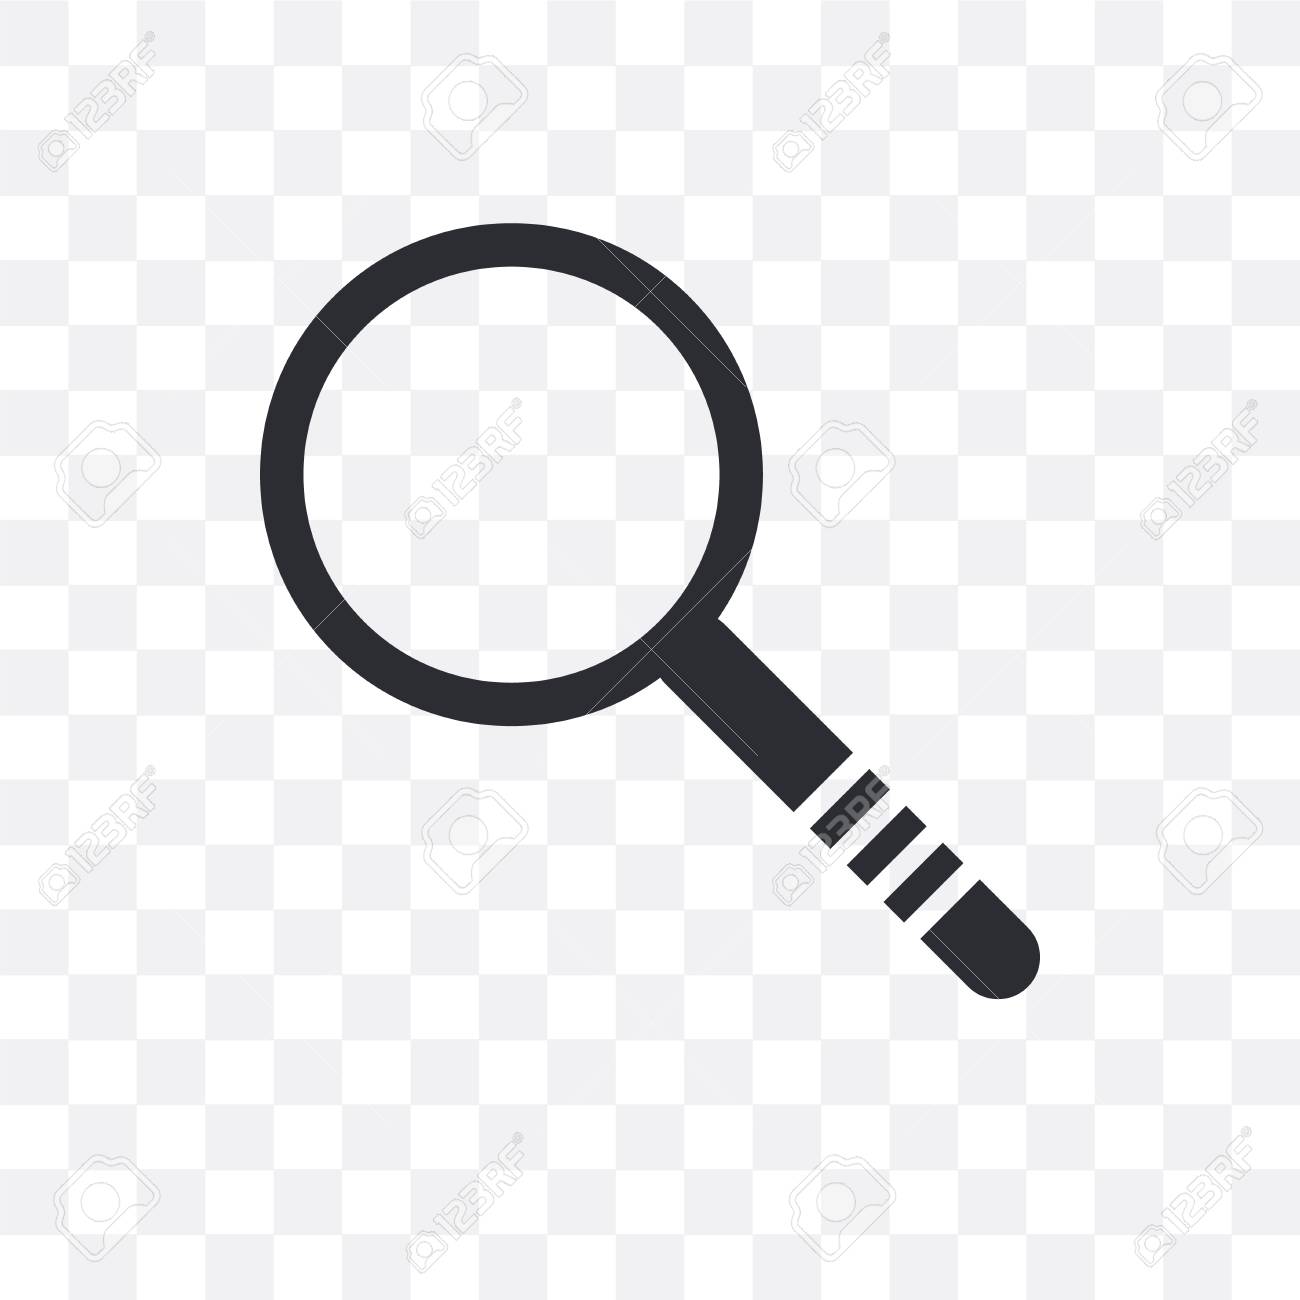 Investigation Vector Icon Isolated On Transparent Background